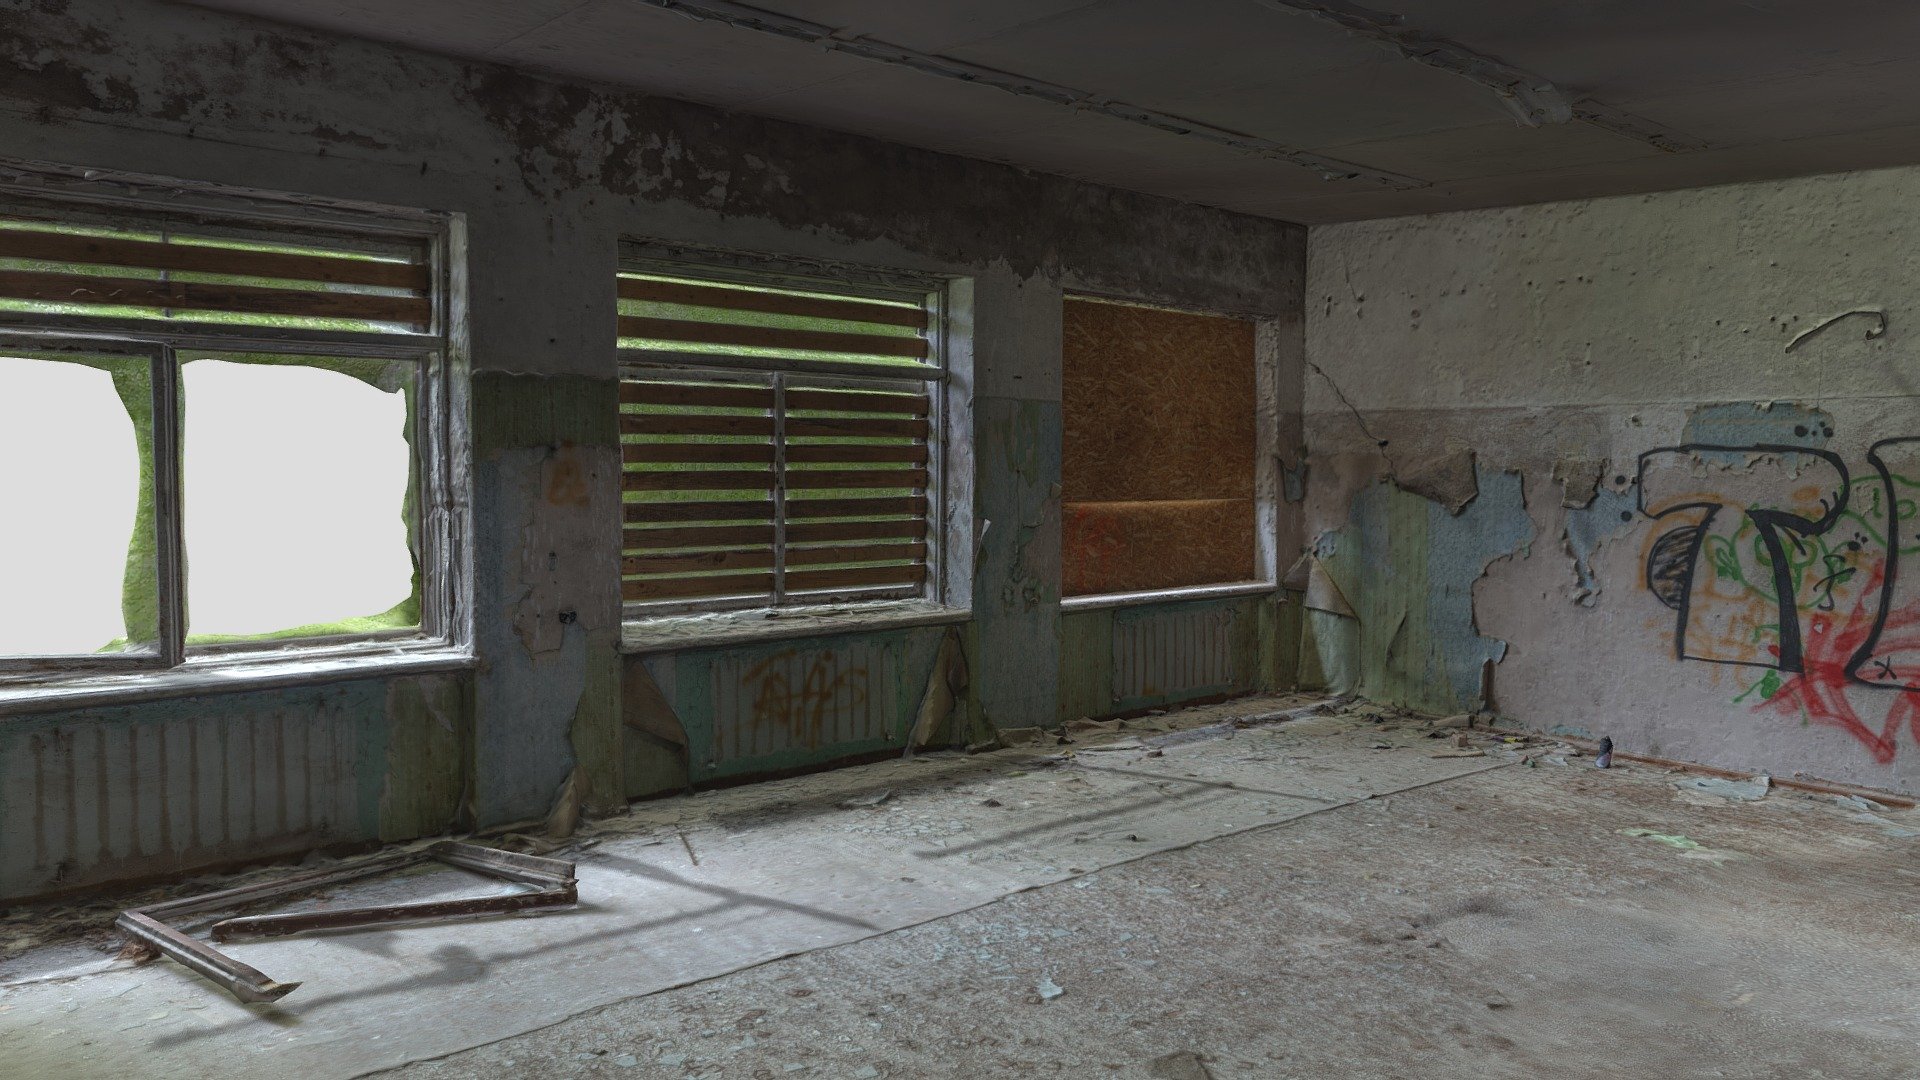 3D scan of a room in an abandoned soviet school.
Wooden planks covering some windows. 
With normal map 3d model